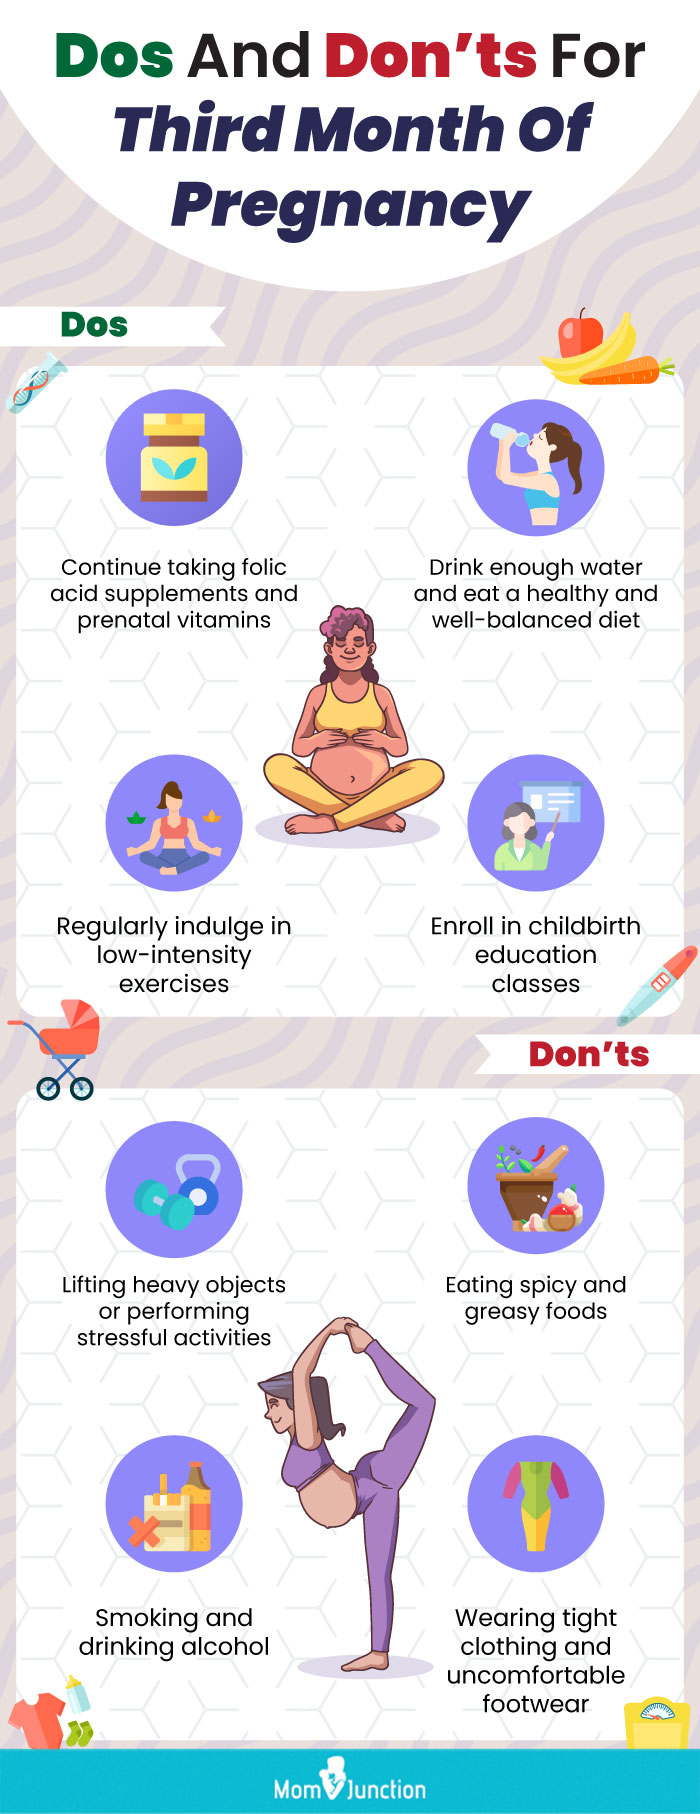 https://www.momjunction.com/wp-content/uploads/2015/07/Infographic-Care-To-Take-During-Third-Month-Of-Pregnancy.jpg